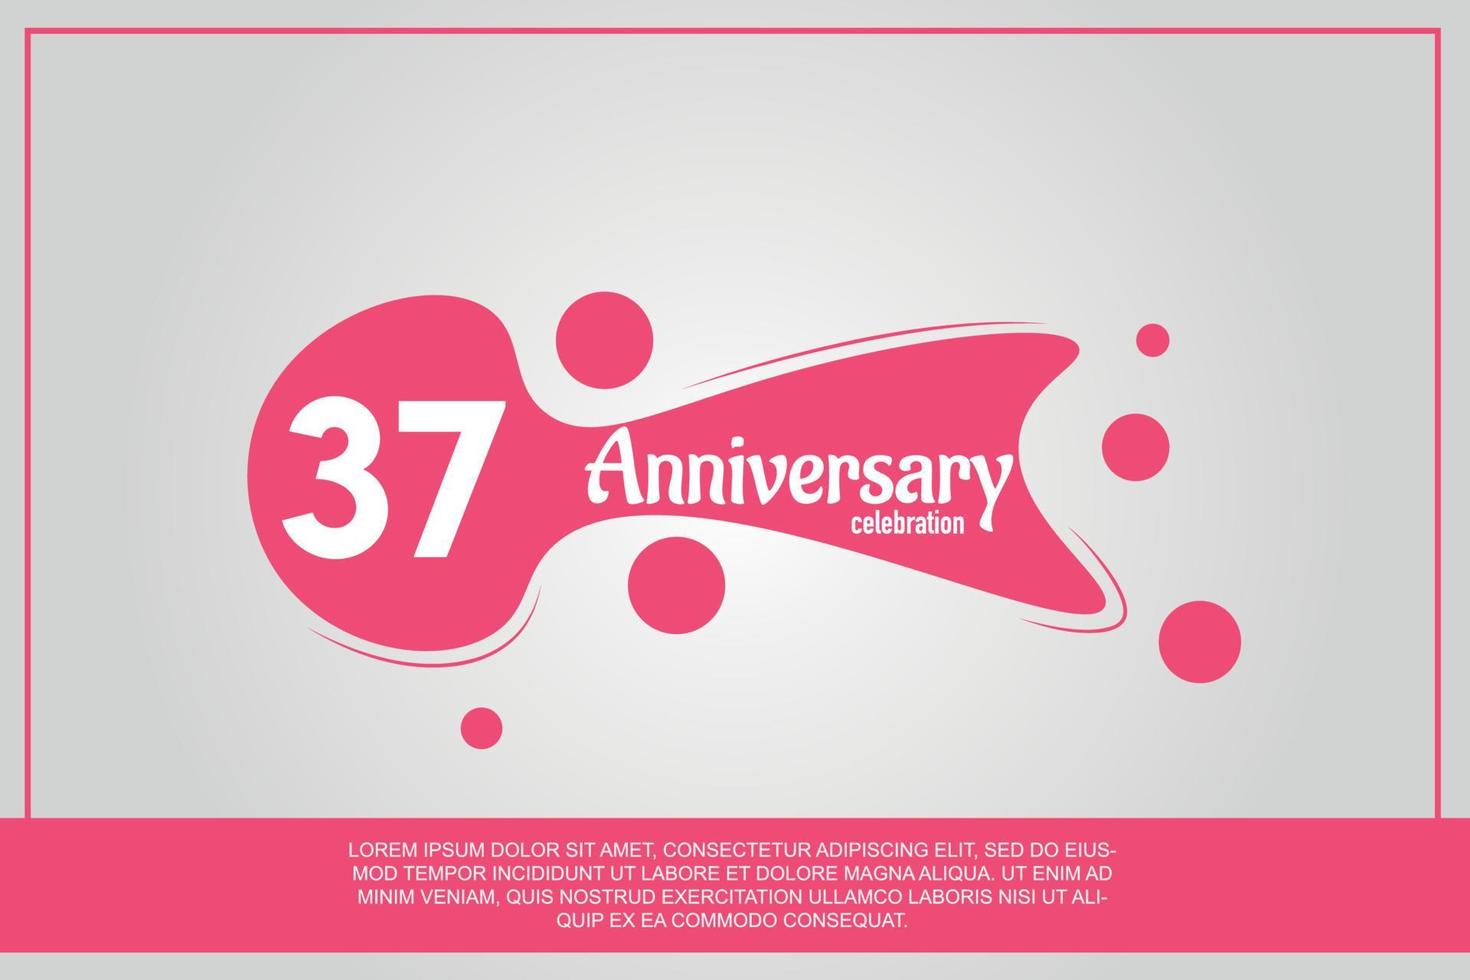 37 year anniversary celebration logo with pink color design with pink color bubbles on gray background vector abstract illustration